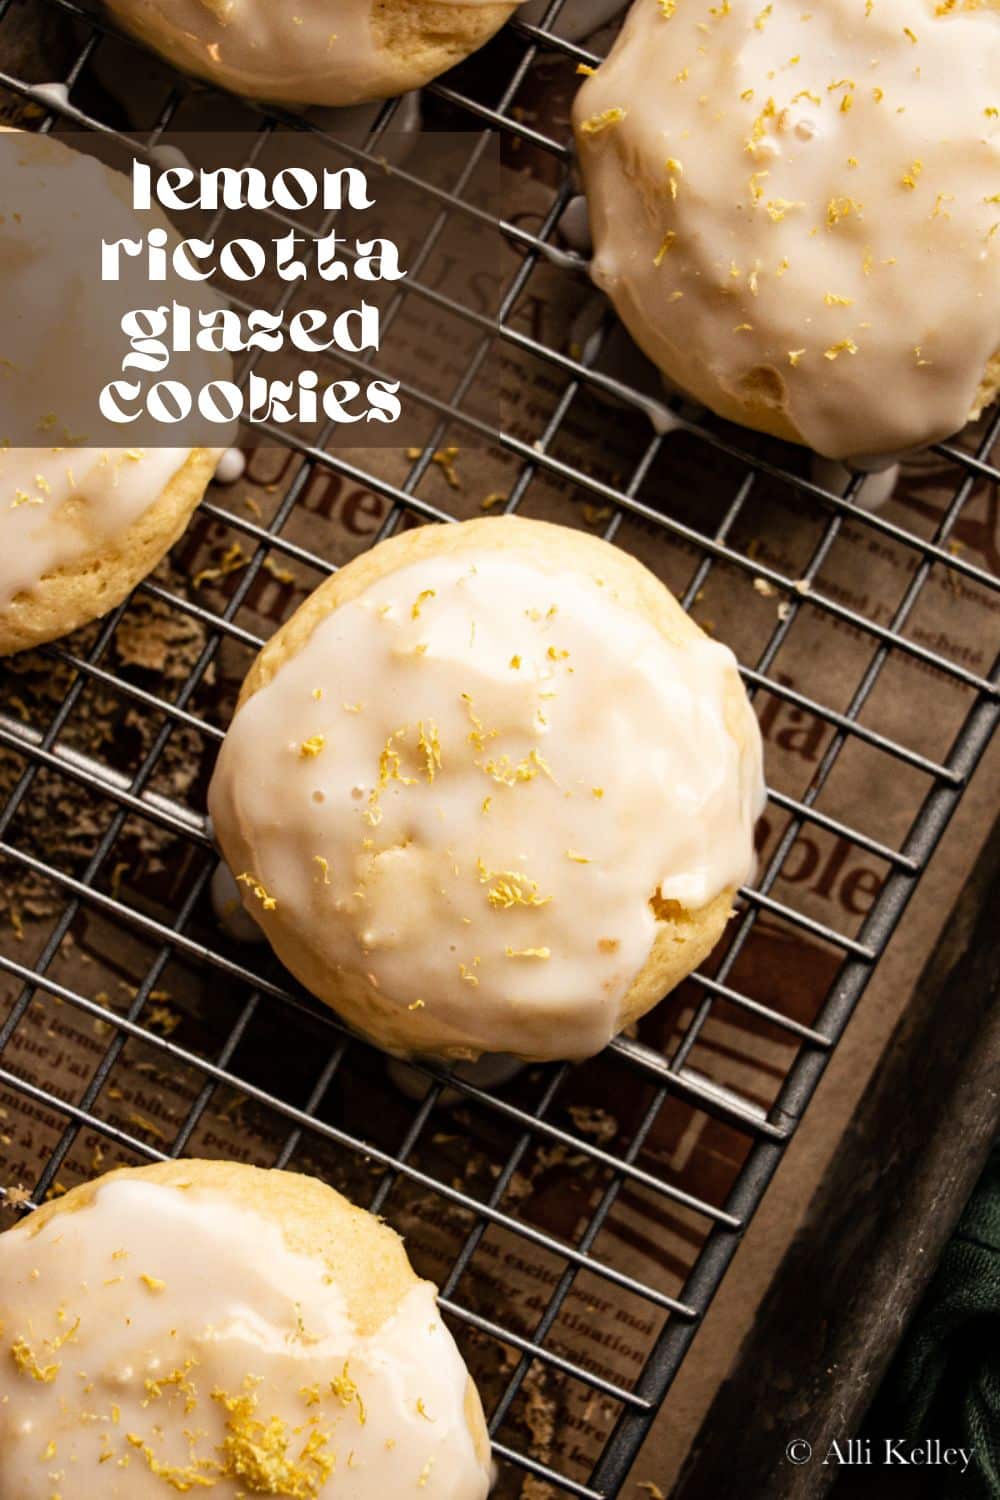 Soft on the inside and slightly crunchy on the outside, these lemon ricotta cookies truly are a treat. They combine creamy, rich ricotta cheese with bright and zesty lemons for an unforgettable flavor! It's just as well my recipe for glazed lemon cookies makes so many - you won't be able to have just one!